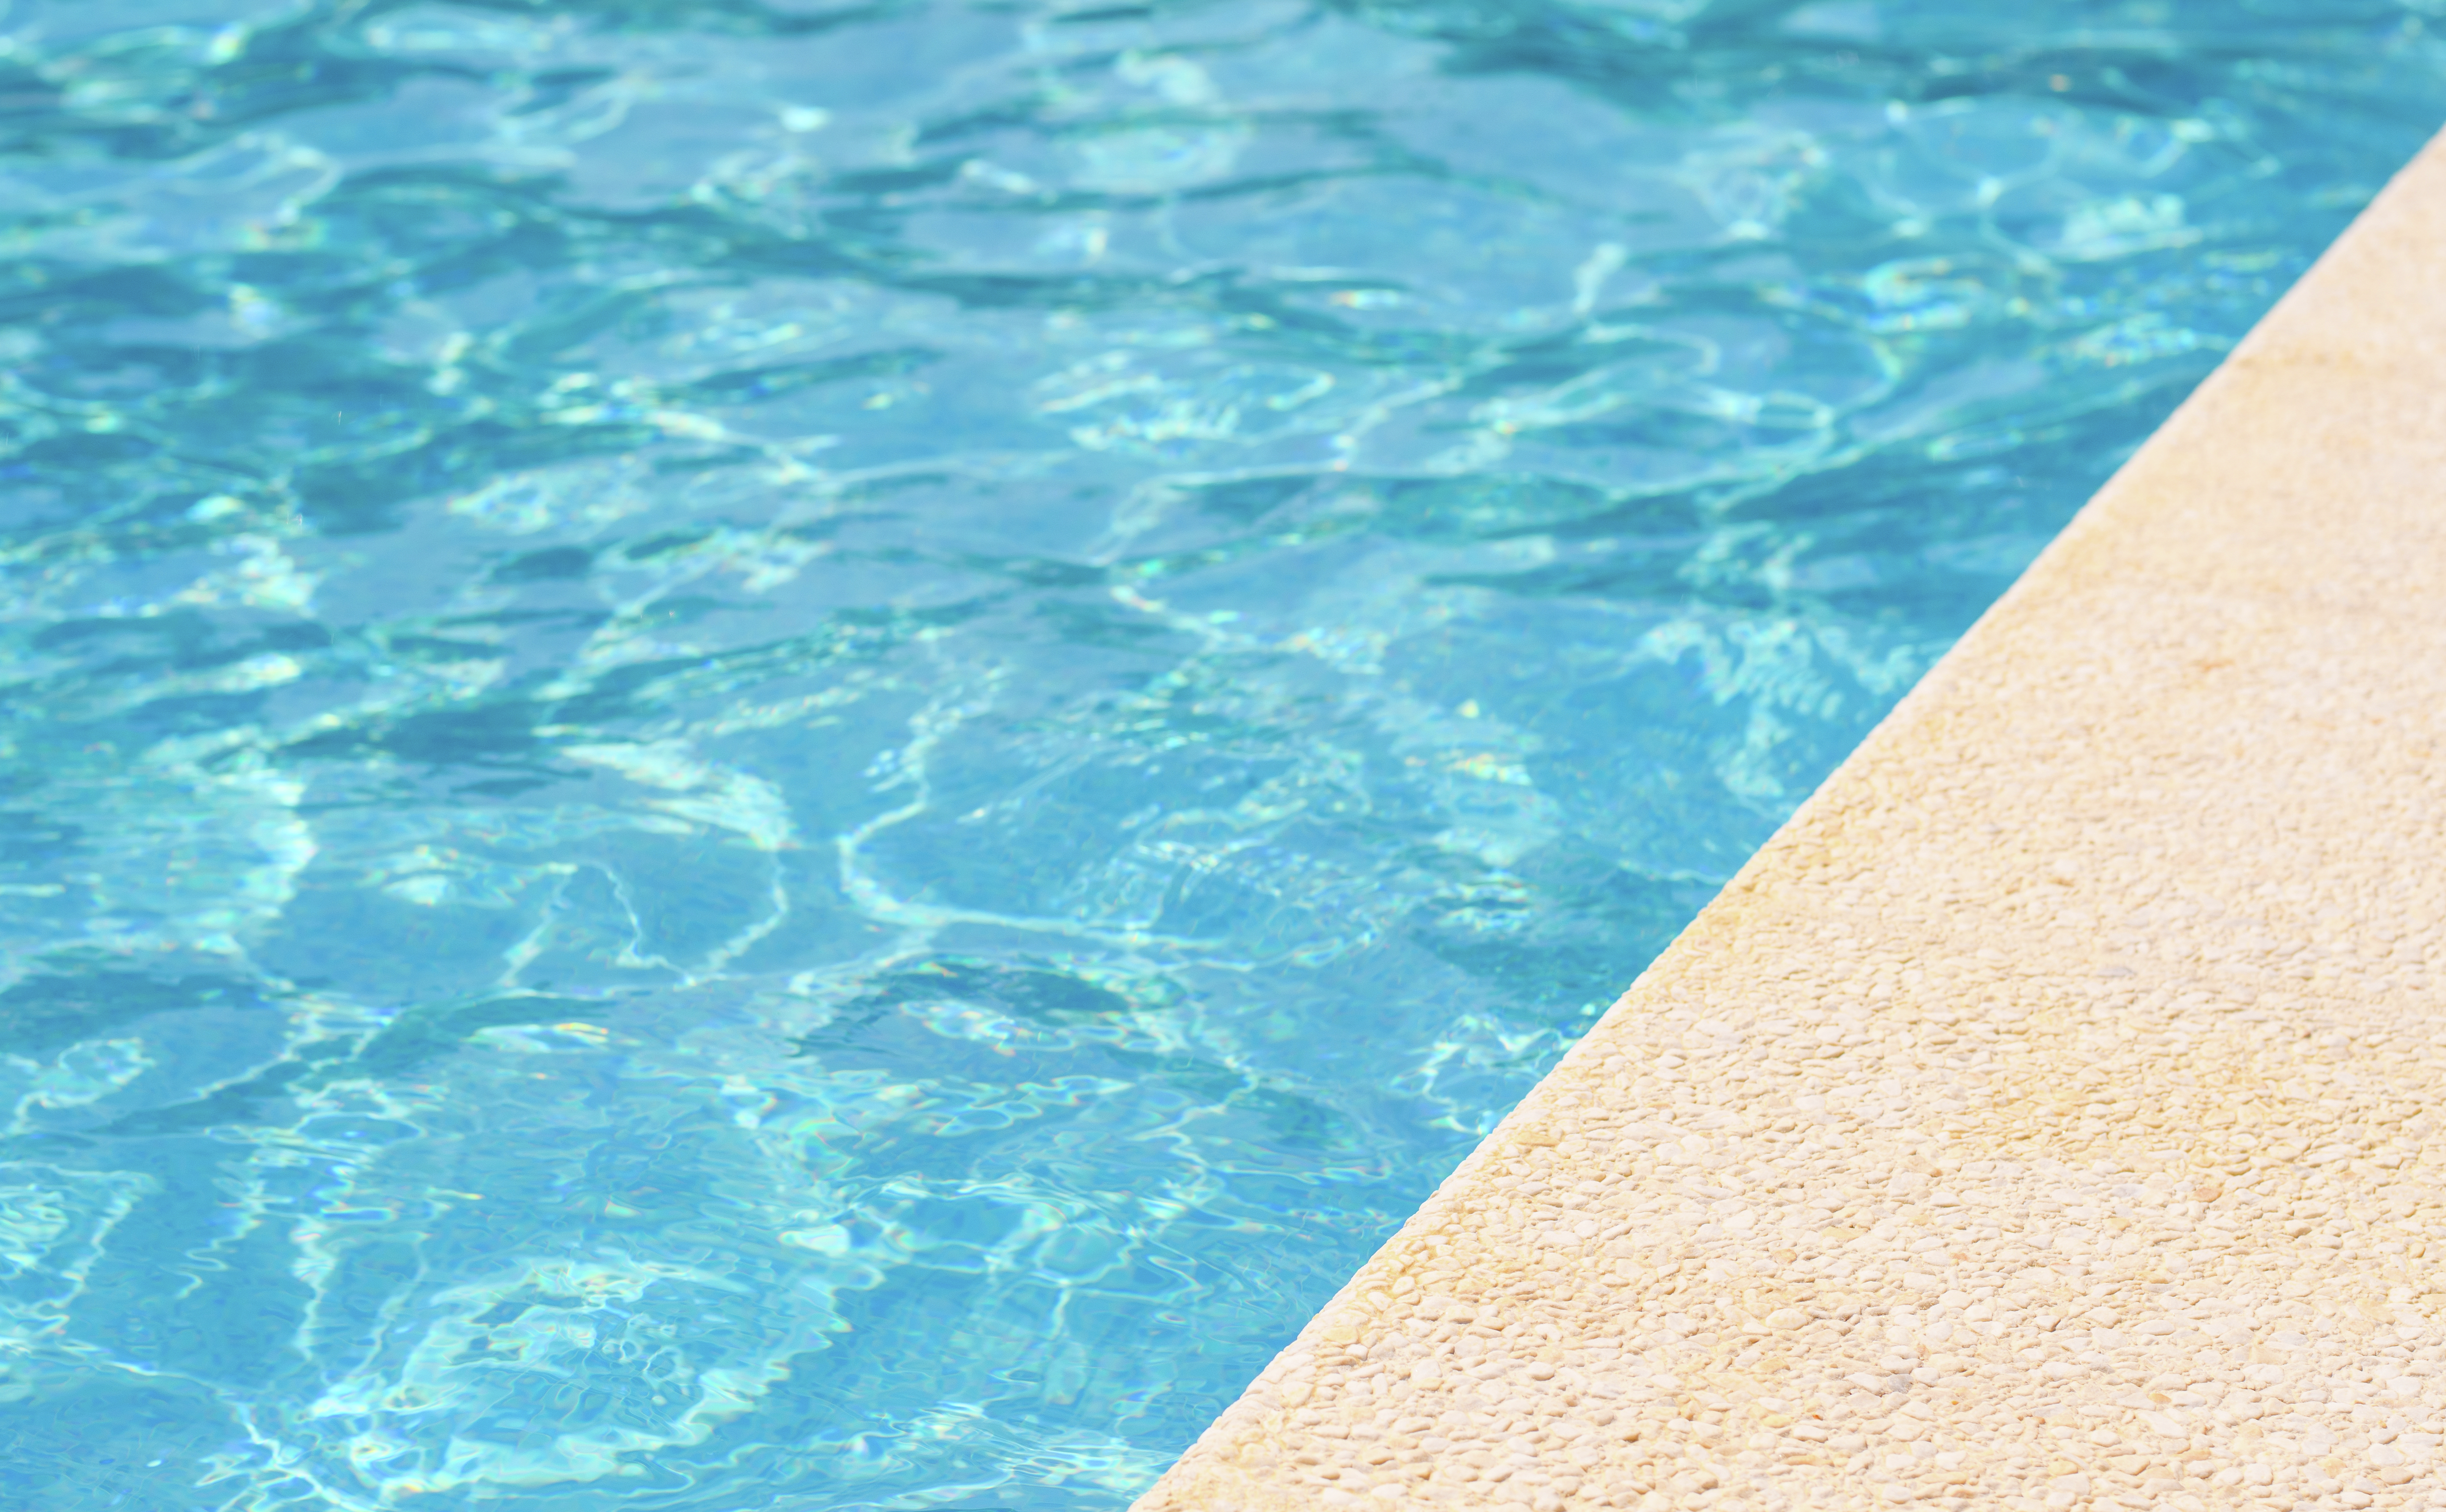 ON THE RECORD: Make swim safety a priority this summer.